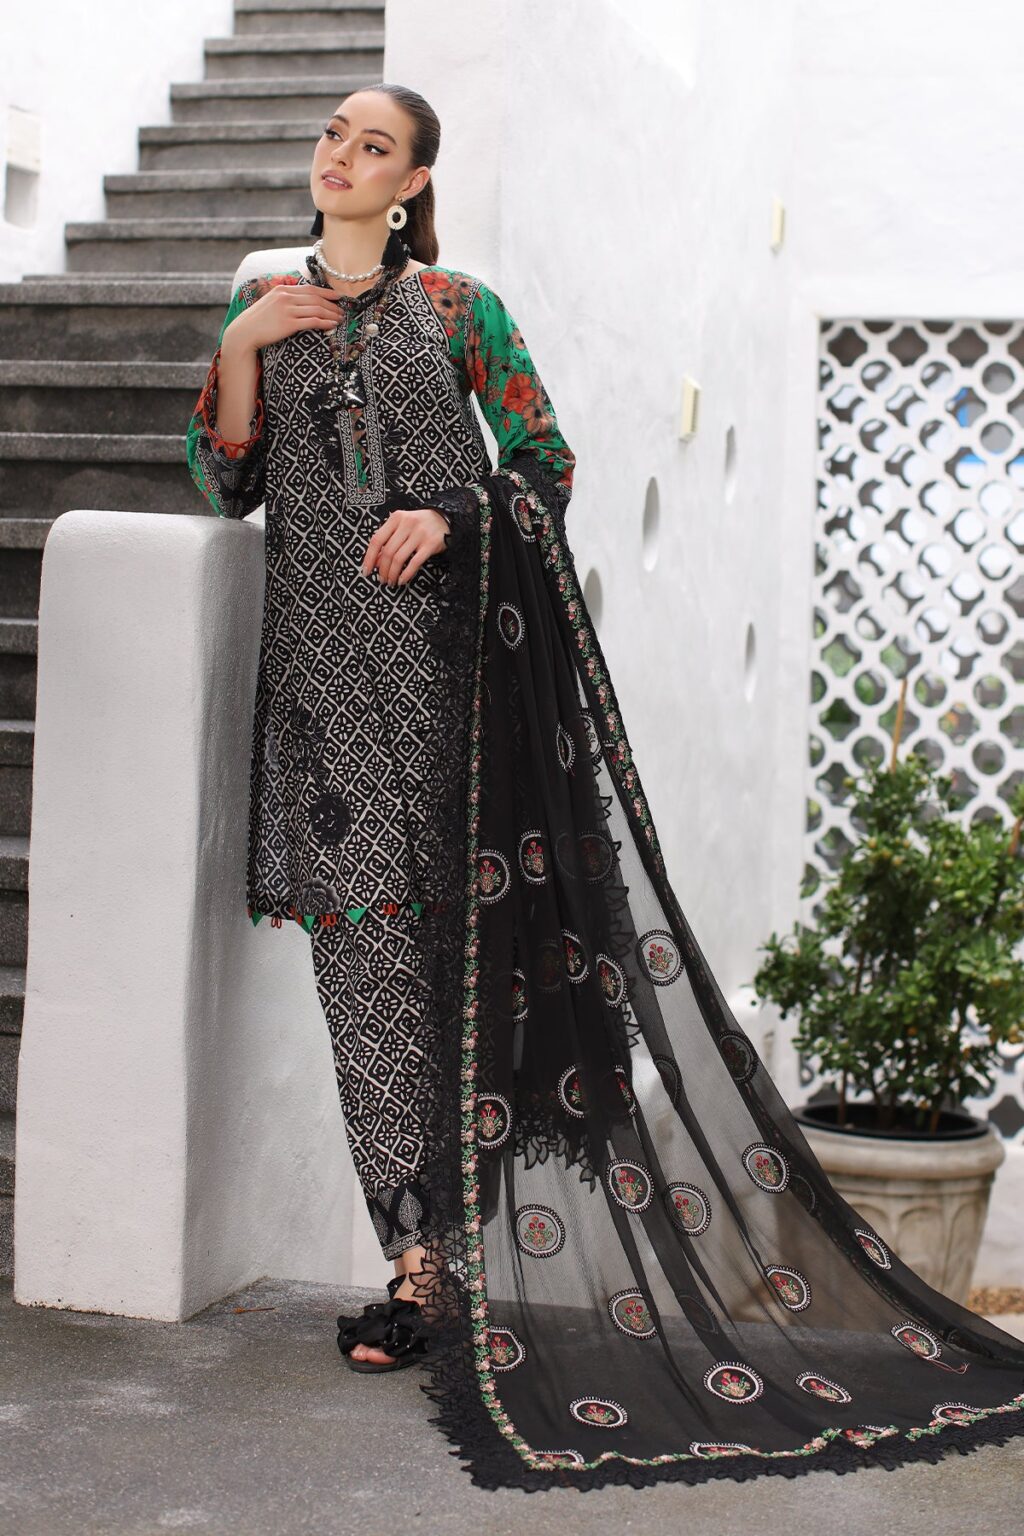 Charizma
PM4-09 3-PC Printed Lawn Shirt with Embroidered ChiffonCollection